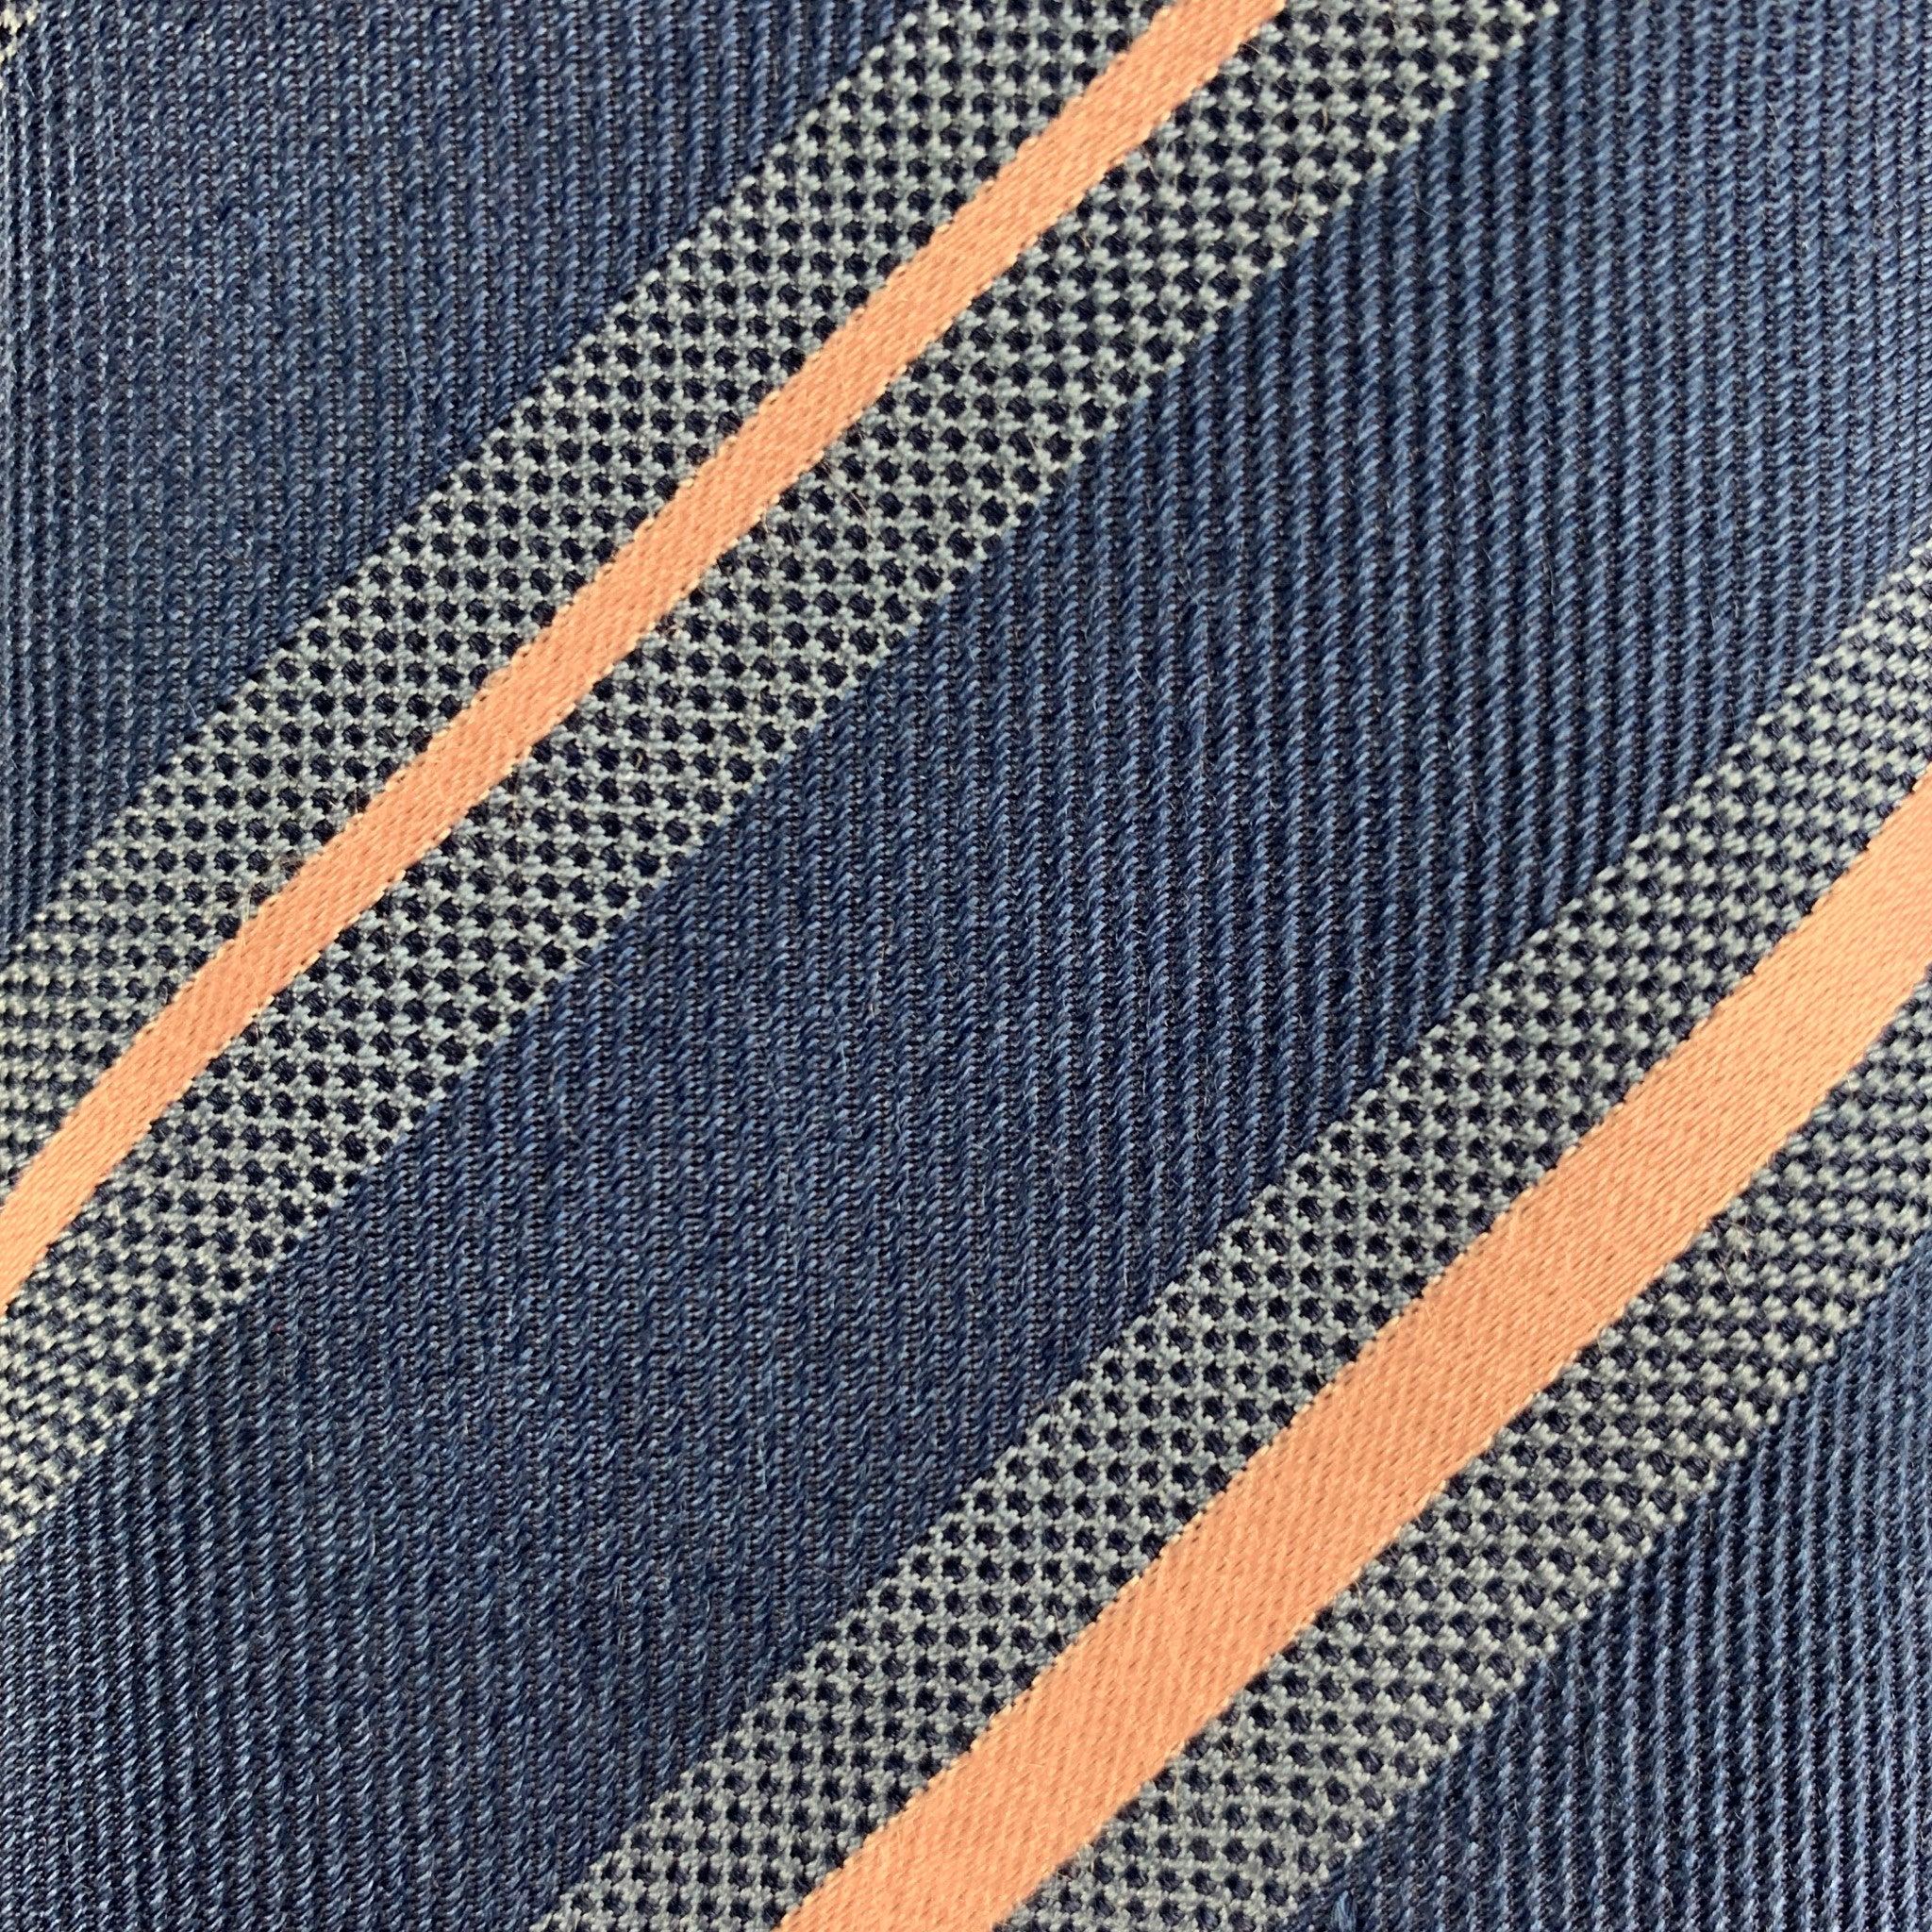 BRIONI classic tie comes in 100% silk, featuring a blue & pink diagonal striped design. Handmade in Italy.Very Good Pre-Owned Condition. 

Measurements: 
  Width: 3 inches Length: 56 inches 



  
  
 
Reference: 125906
Category: Tie
More Details
  